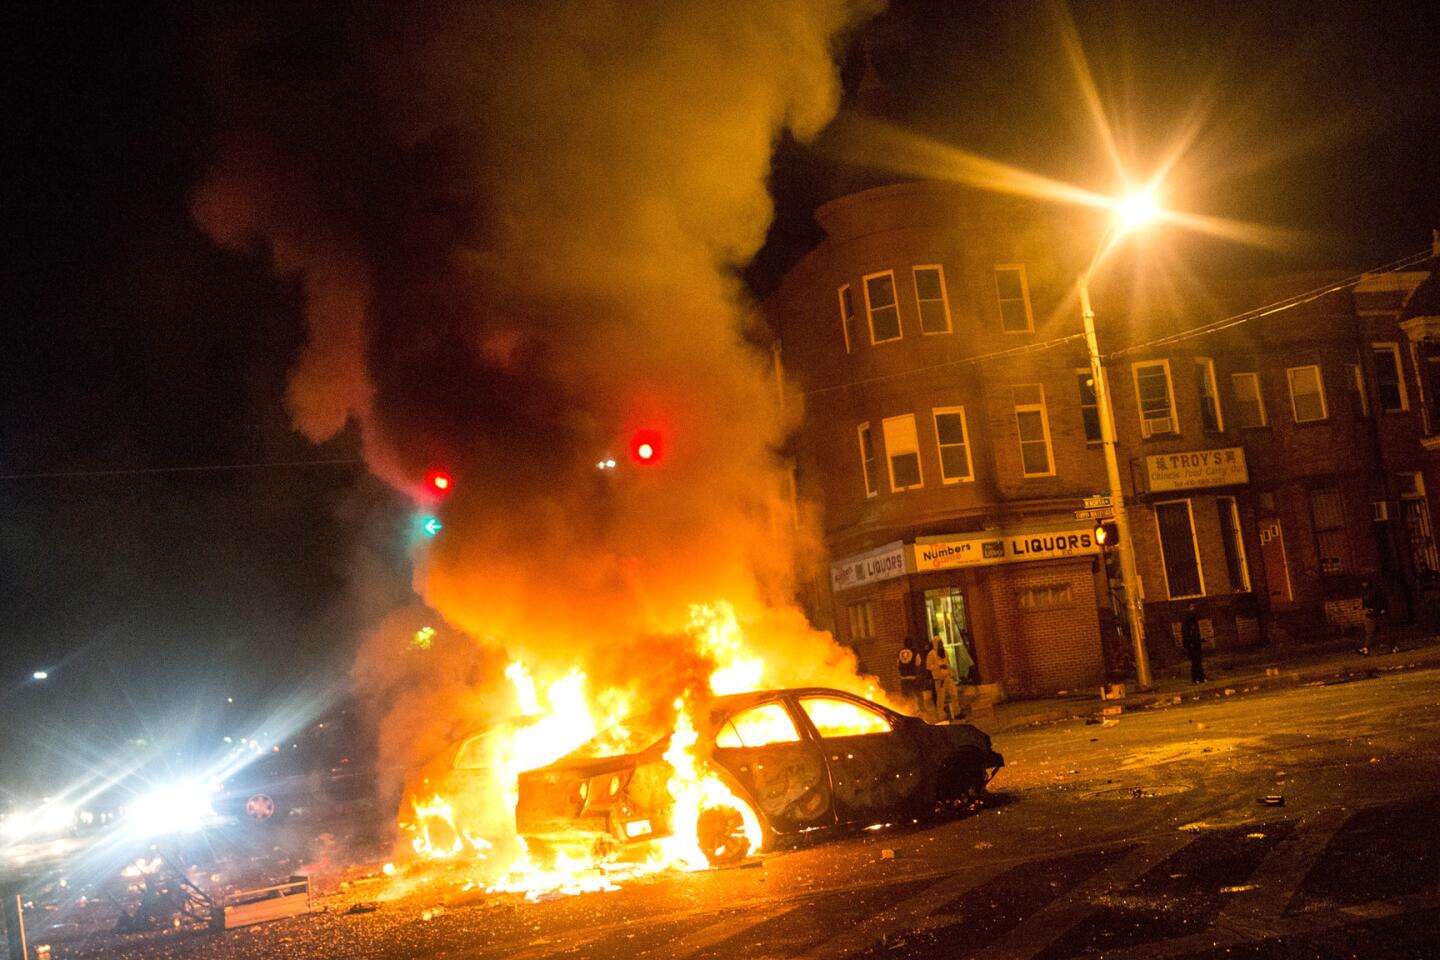 Baltimore protests